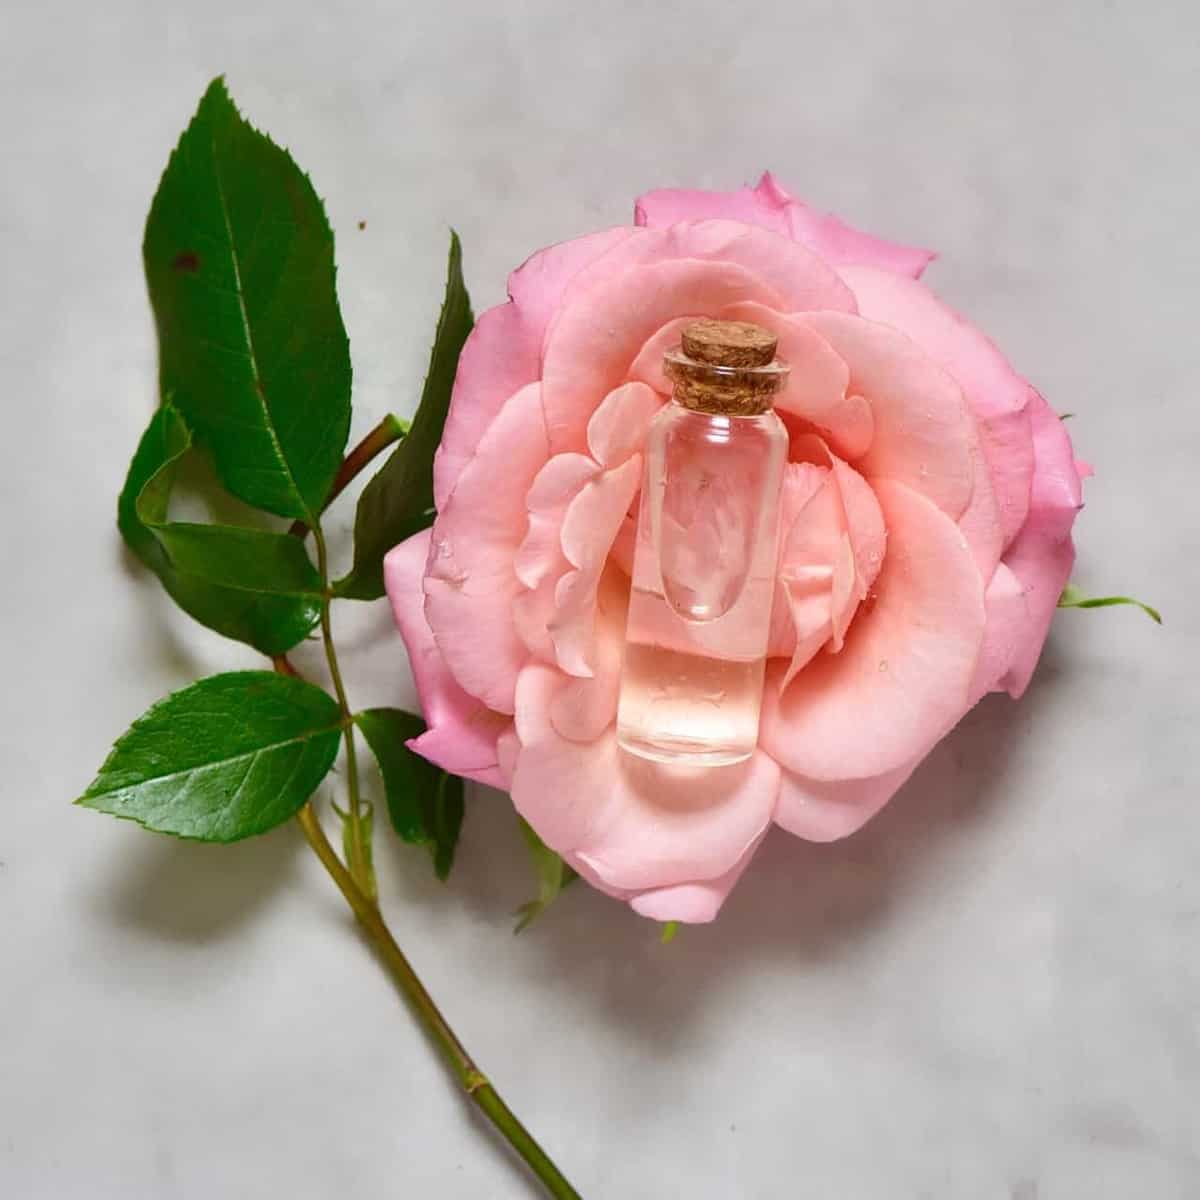 Homemade rose water in a glass vial placed onto a rose flower